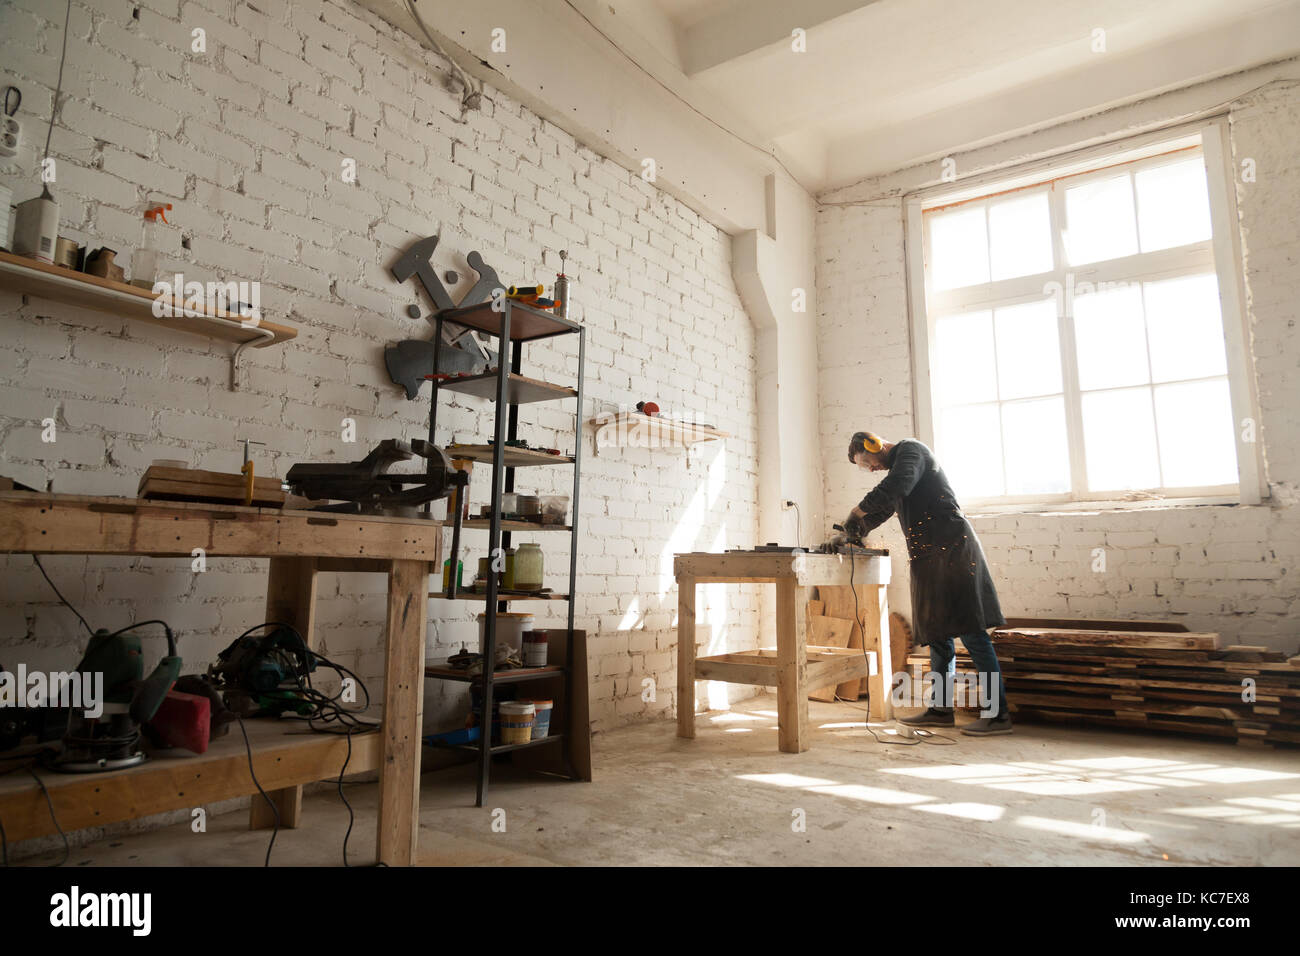 Spacious workshop interior with handyman working with power tool Stock Photo